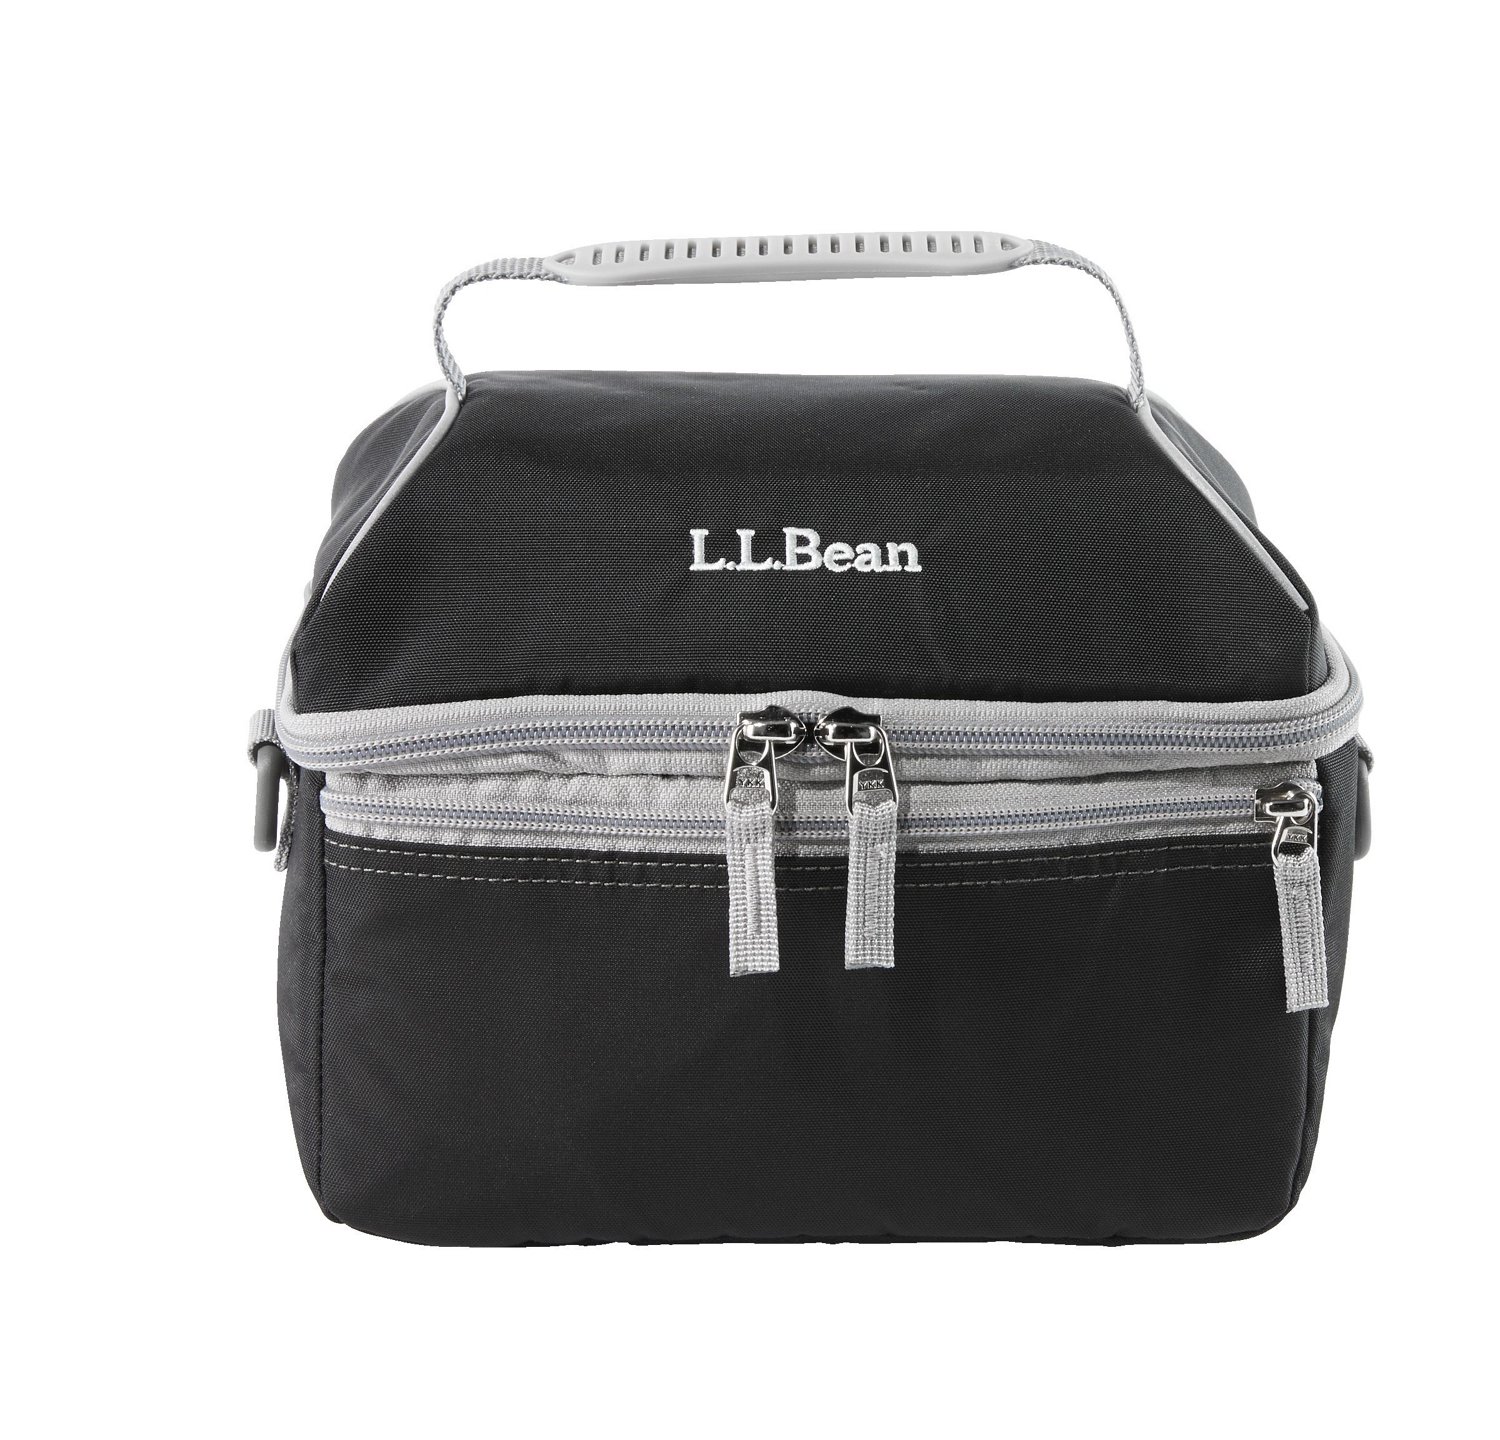 https://academy.scene7.com/is/image/academy//coolers/llbean-flip-top-lunch-box-101450-black/2faac31386b84d559e8c5814868a9f3f?$pdp-gallery-ng$